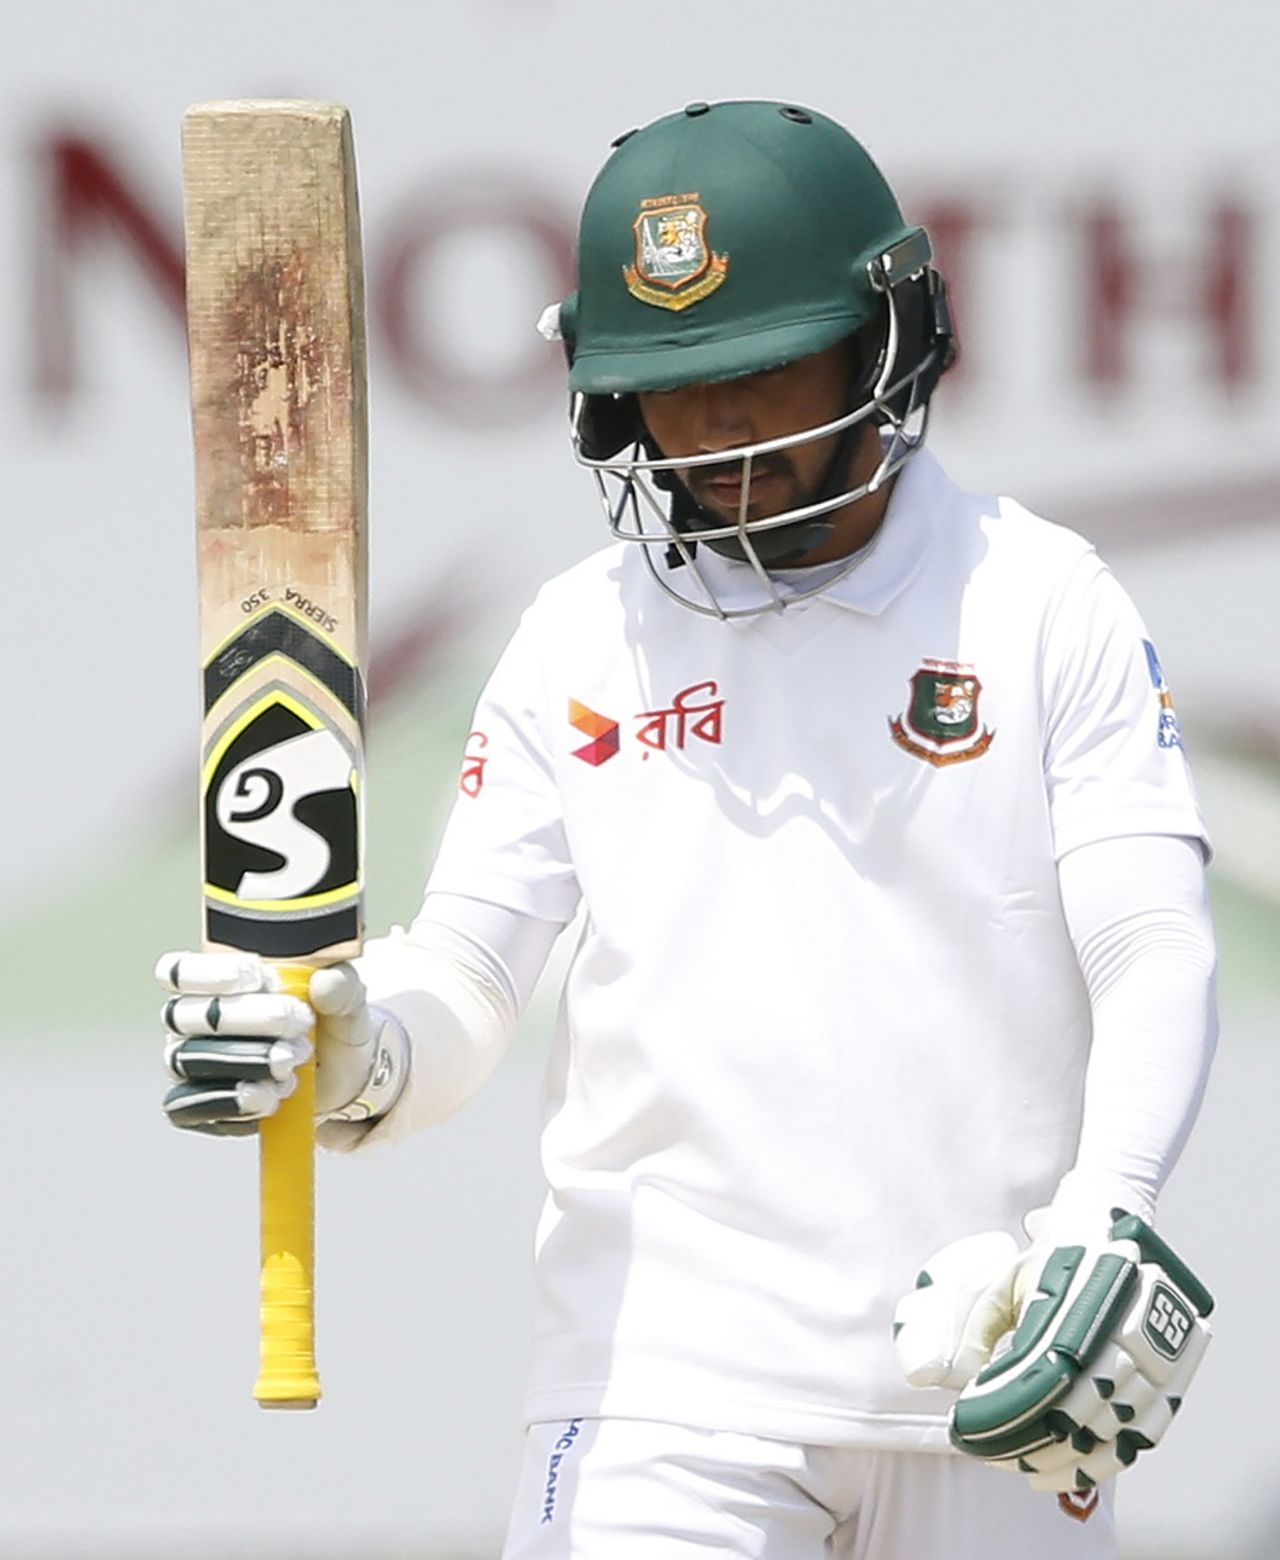 Mominul Haque acknowledges his 12th Test fifty, South Africa v Bangladesh, 1st Test, Potchefstroom, 3rd day, September 30, 2017